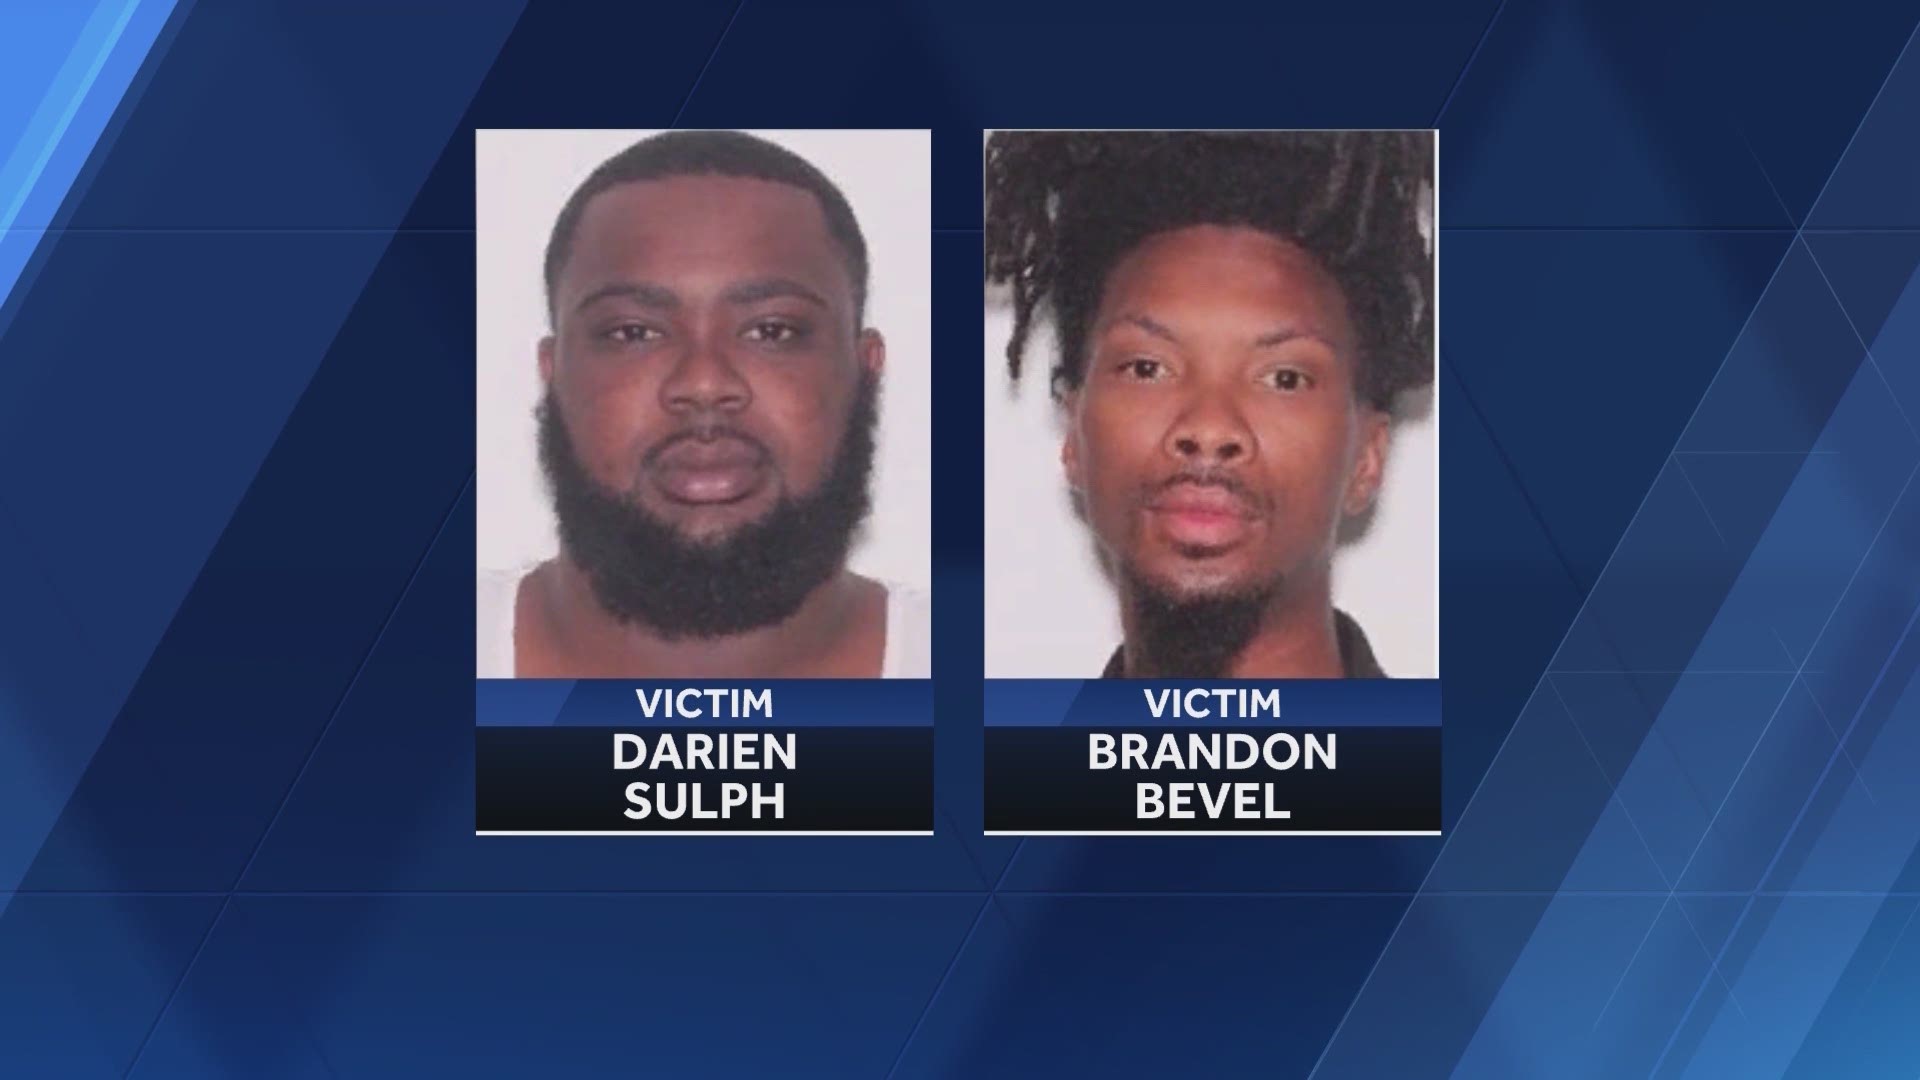 Orlando Police say 25-year-old Darien Sulph and  31-year-old Brandon Bevel were found shot to death Sunday morning inside their car.